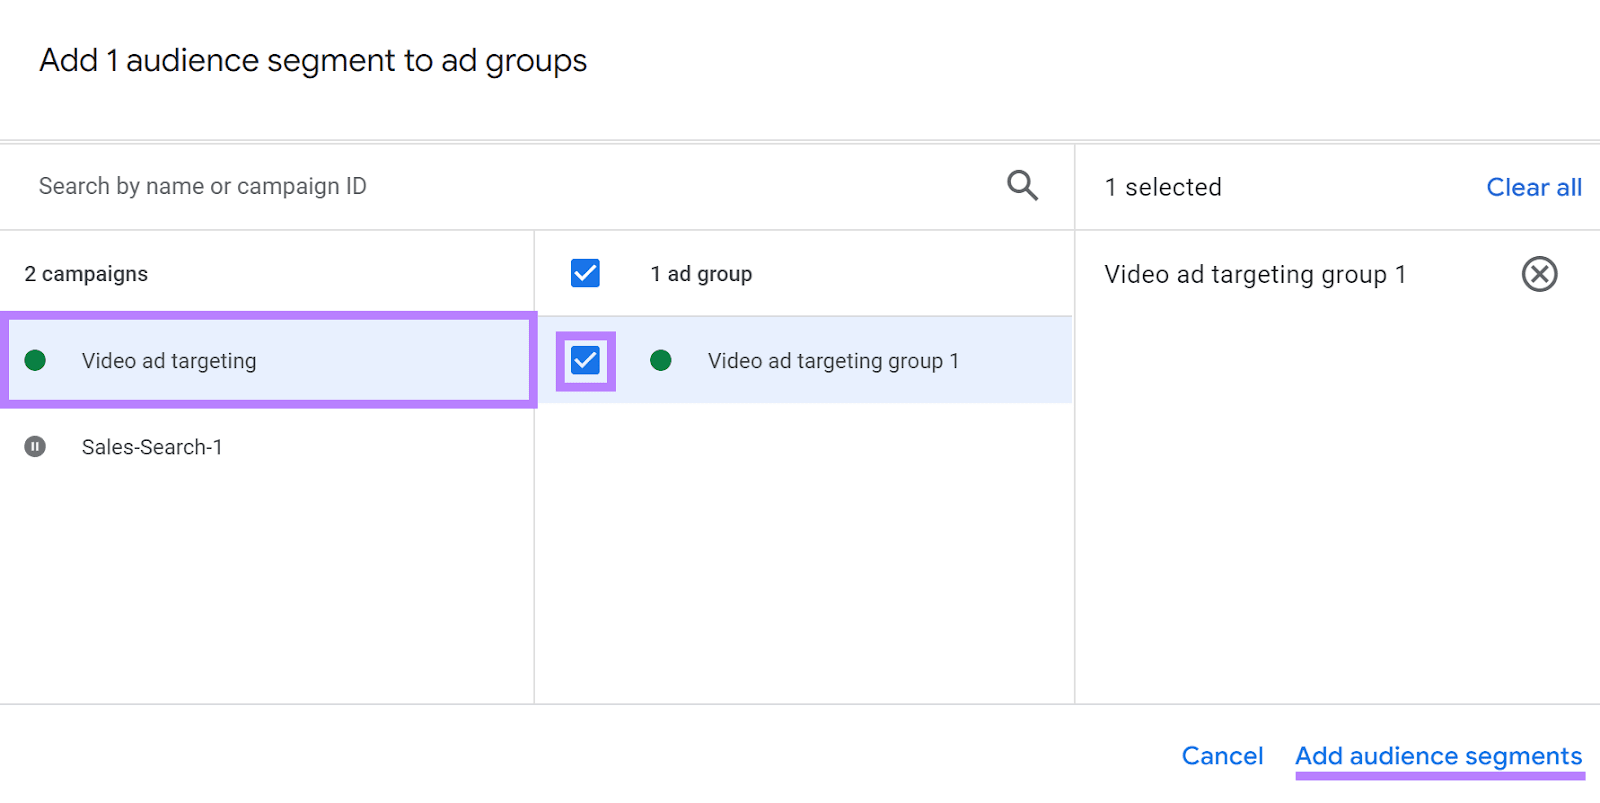 “Add assemblage  segments" to "Video advertisement  targeting" campaign